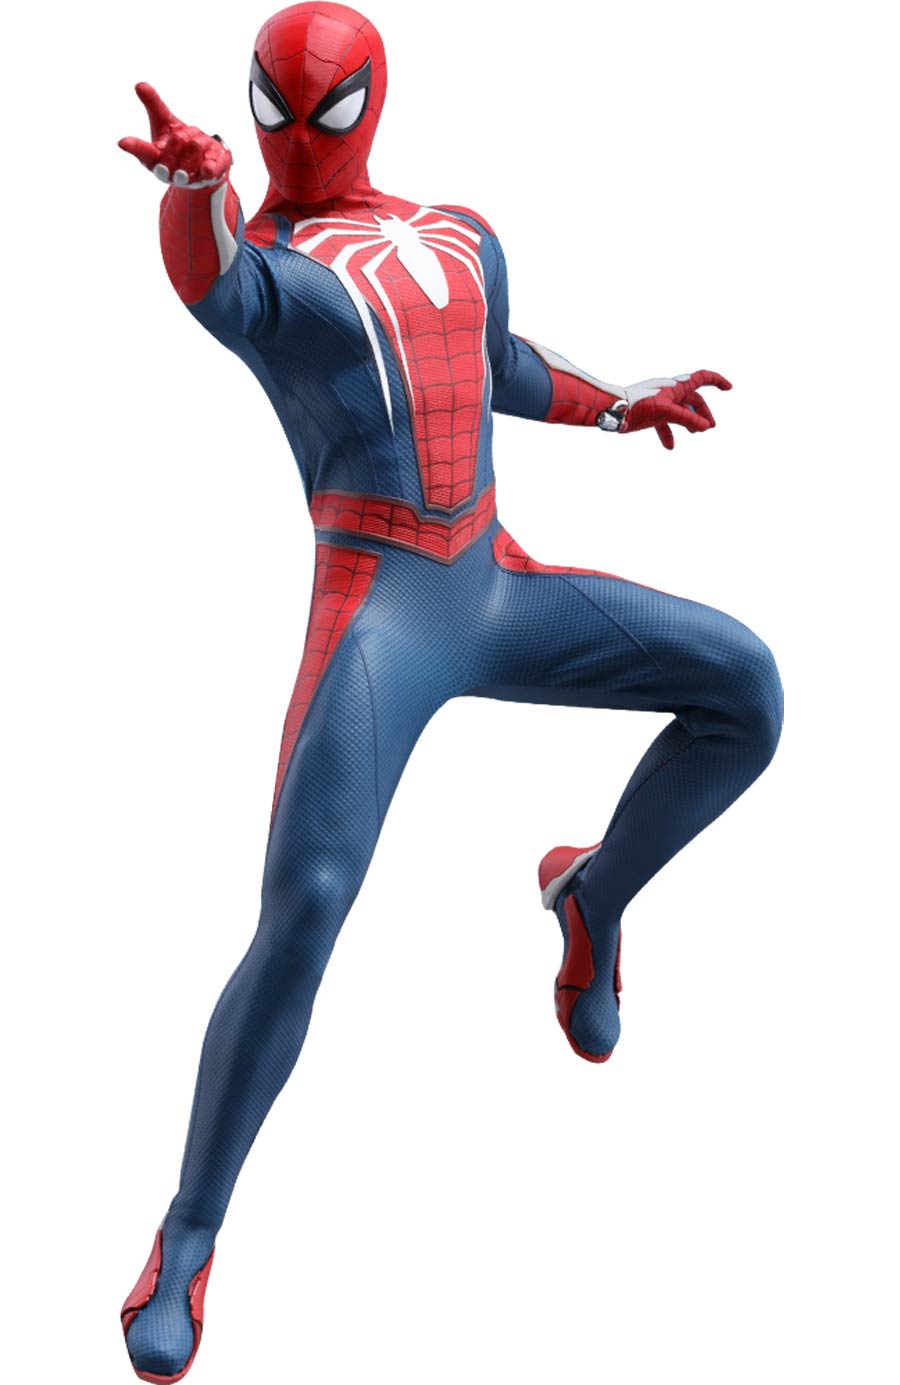 Spider-Man Advanced Suit Video Game Masterpiece Series Sixth Scale Figure